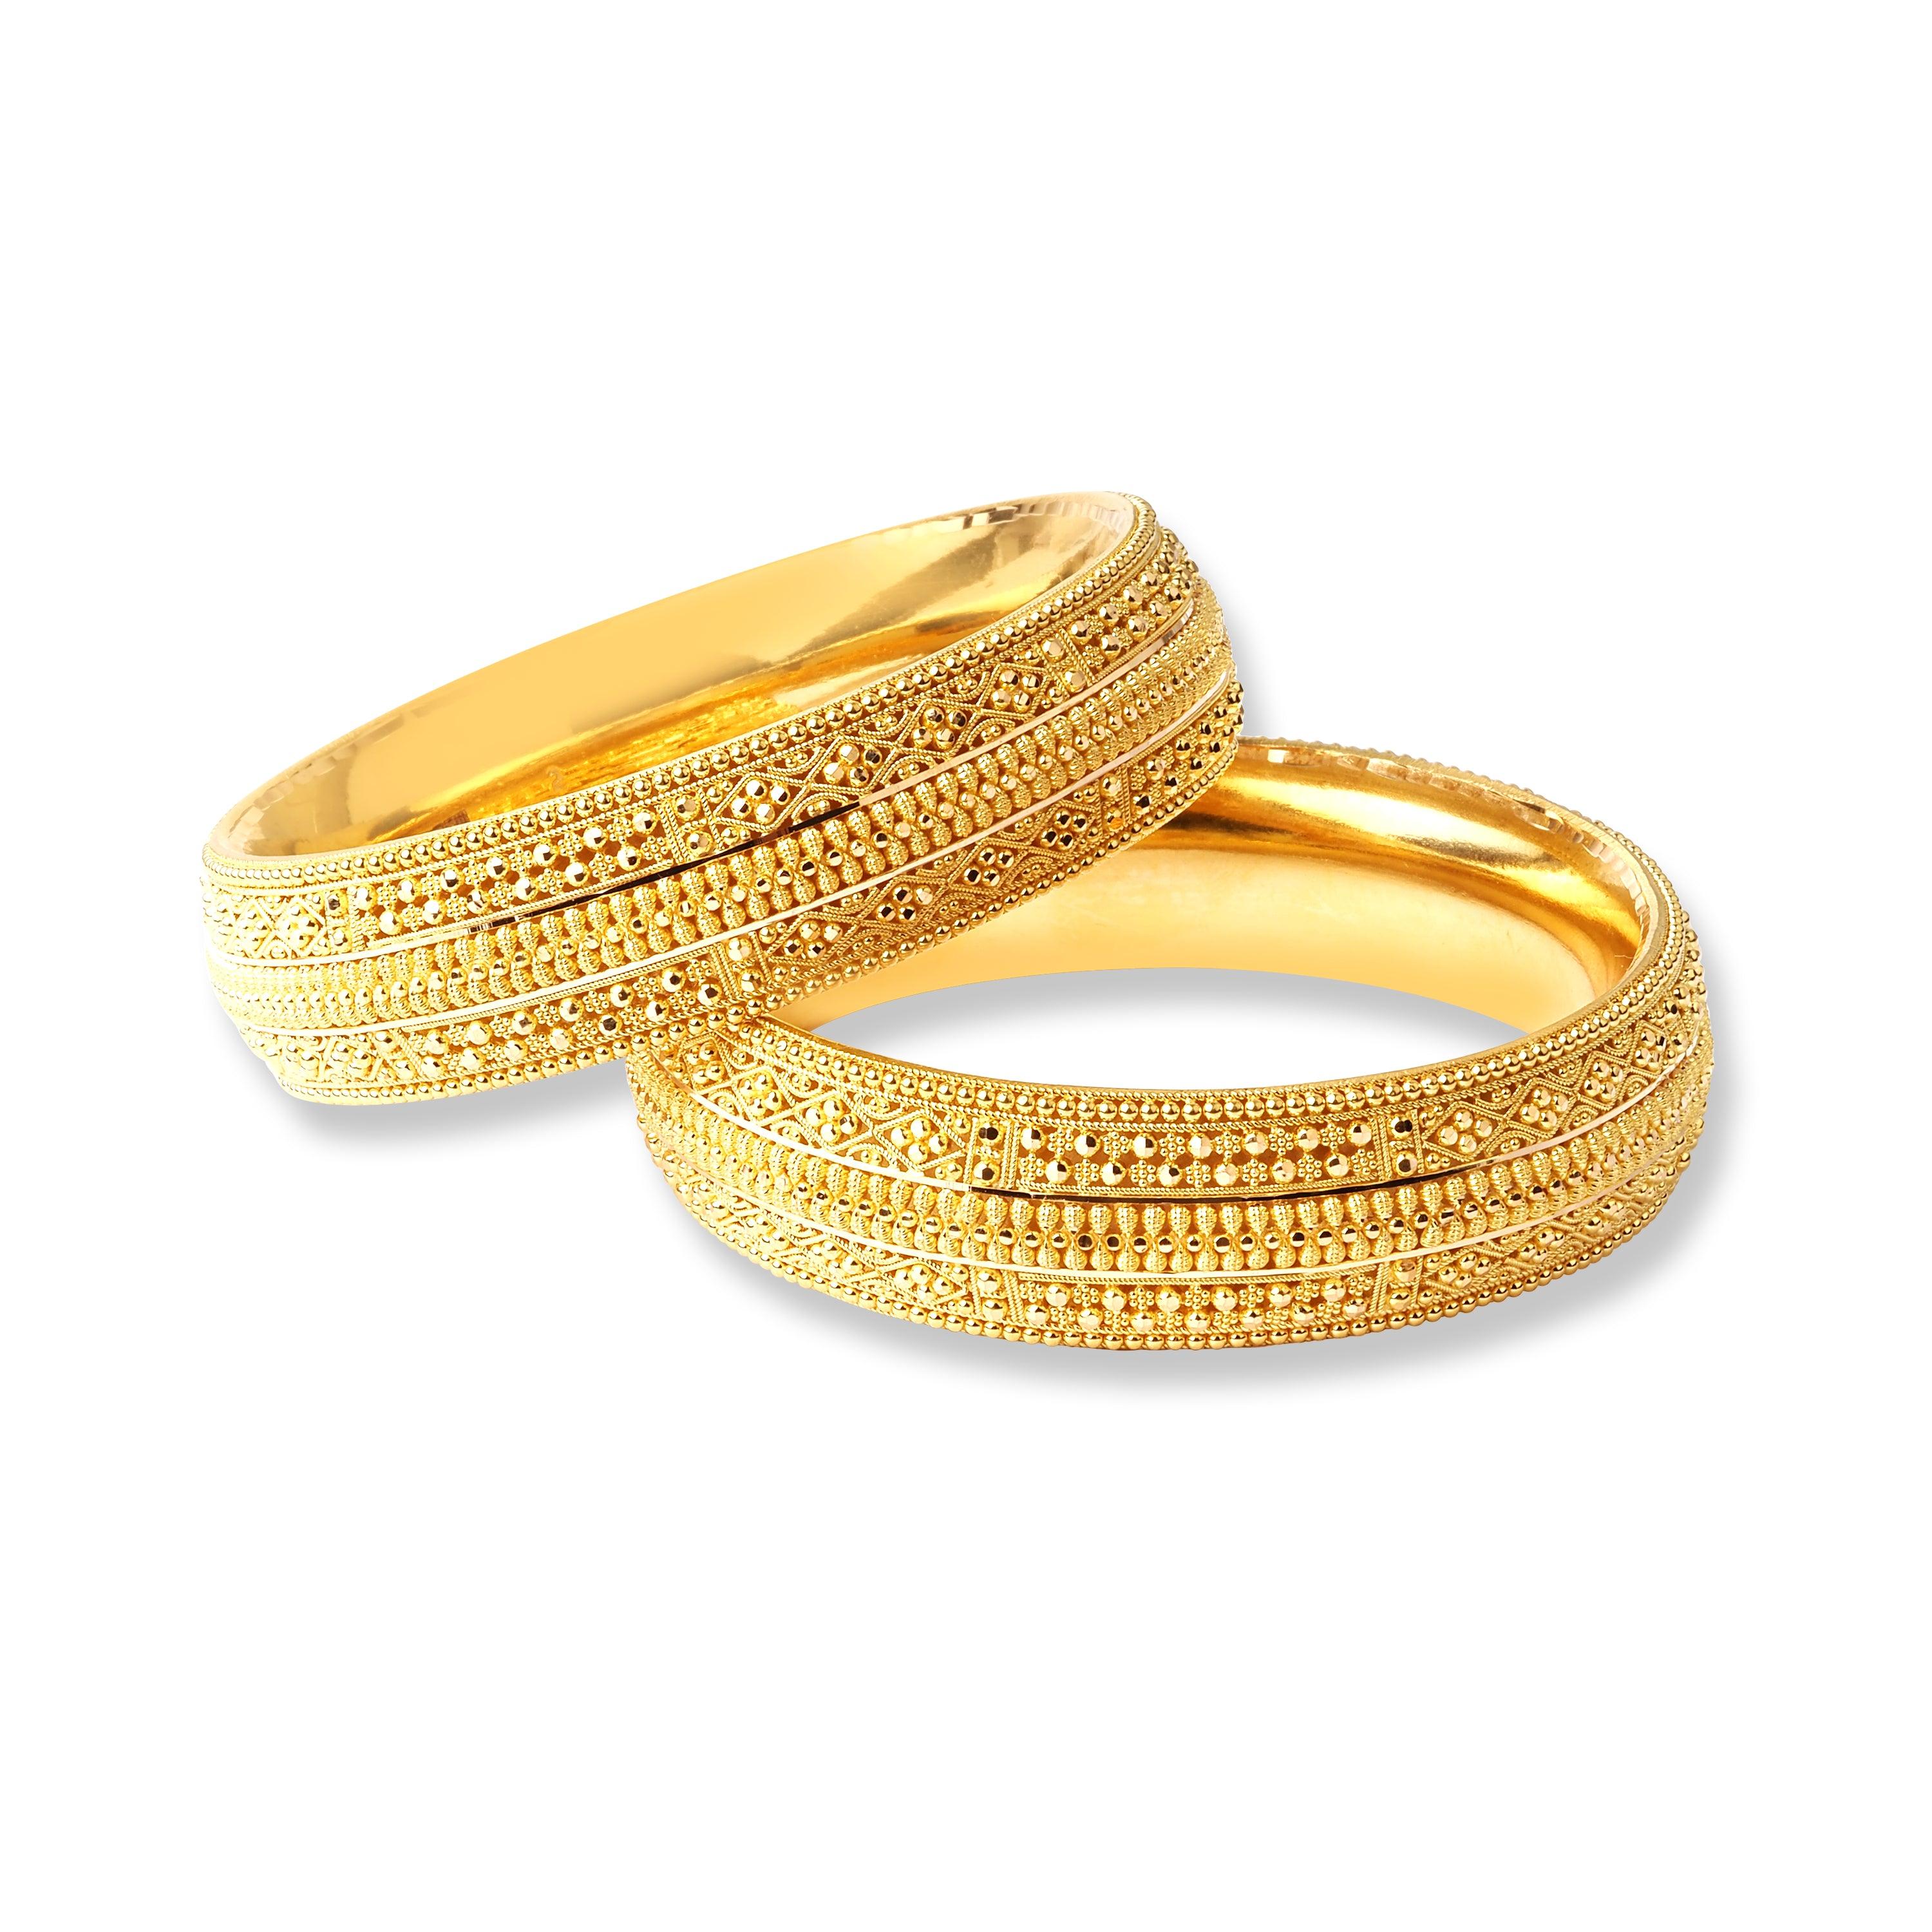 22ct Gold Pair of Bangles with Filigree Work & Comfort fit Finish B-8512 - Minar Jewellers